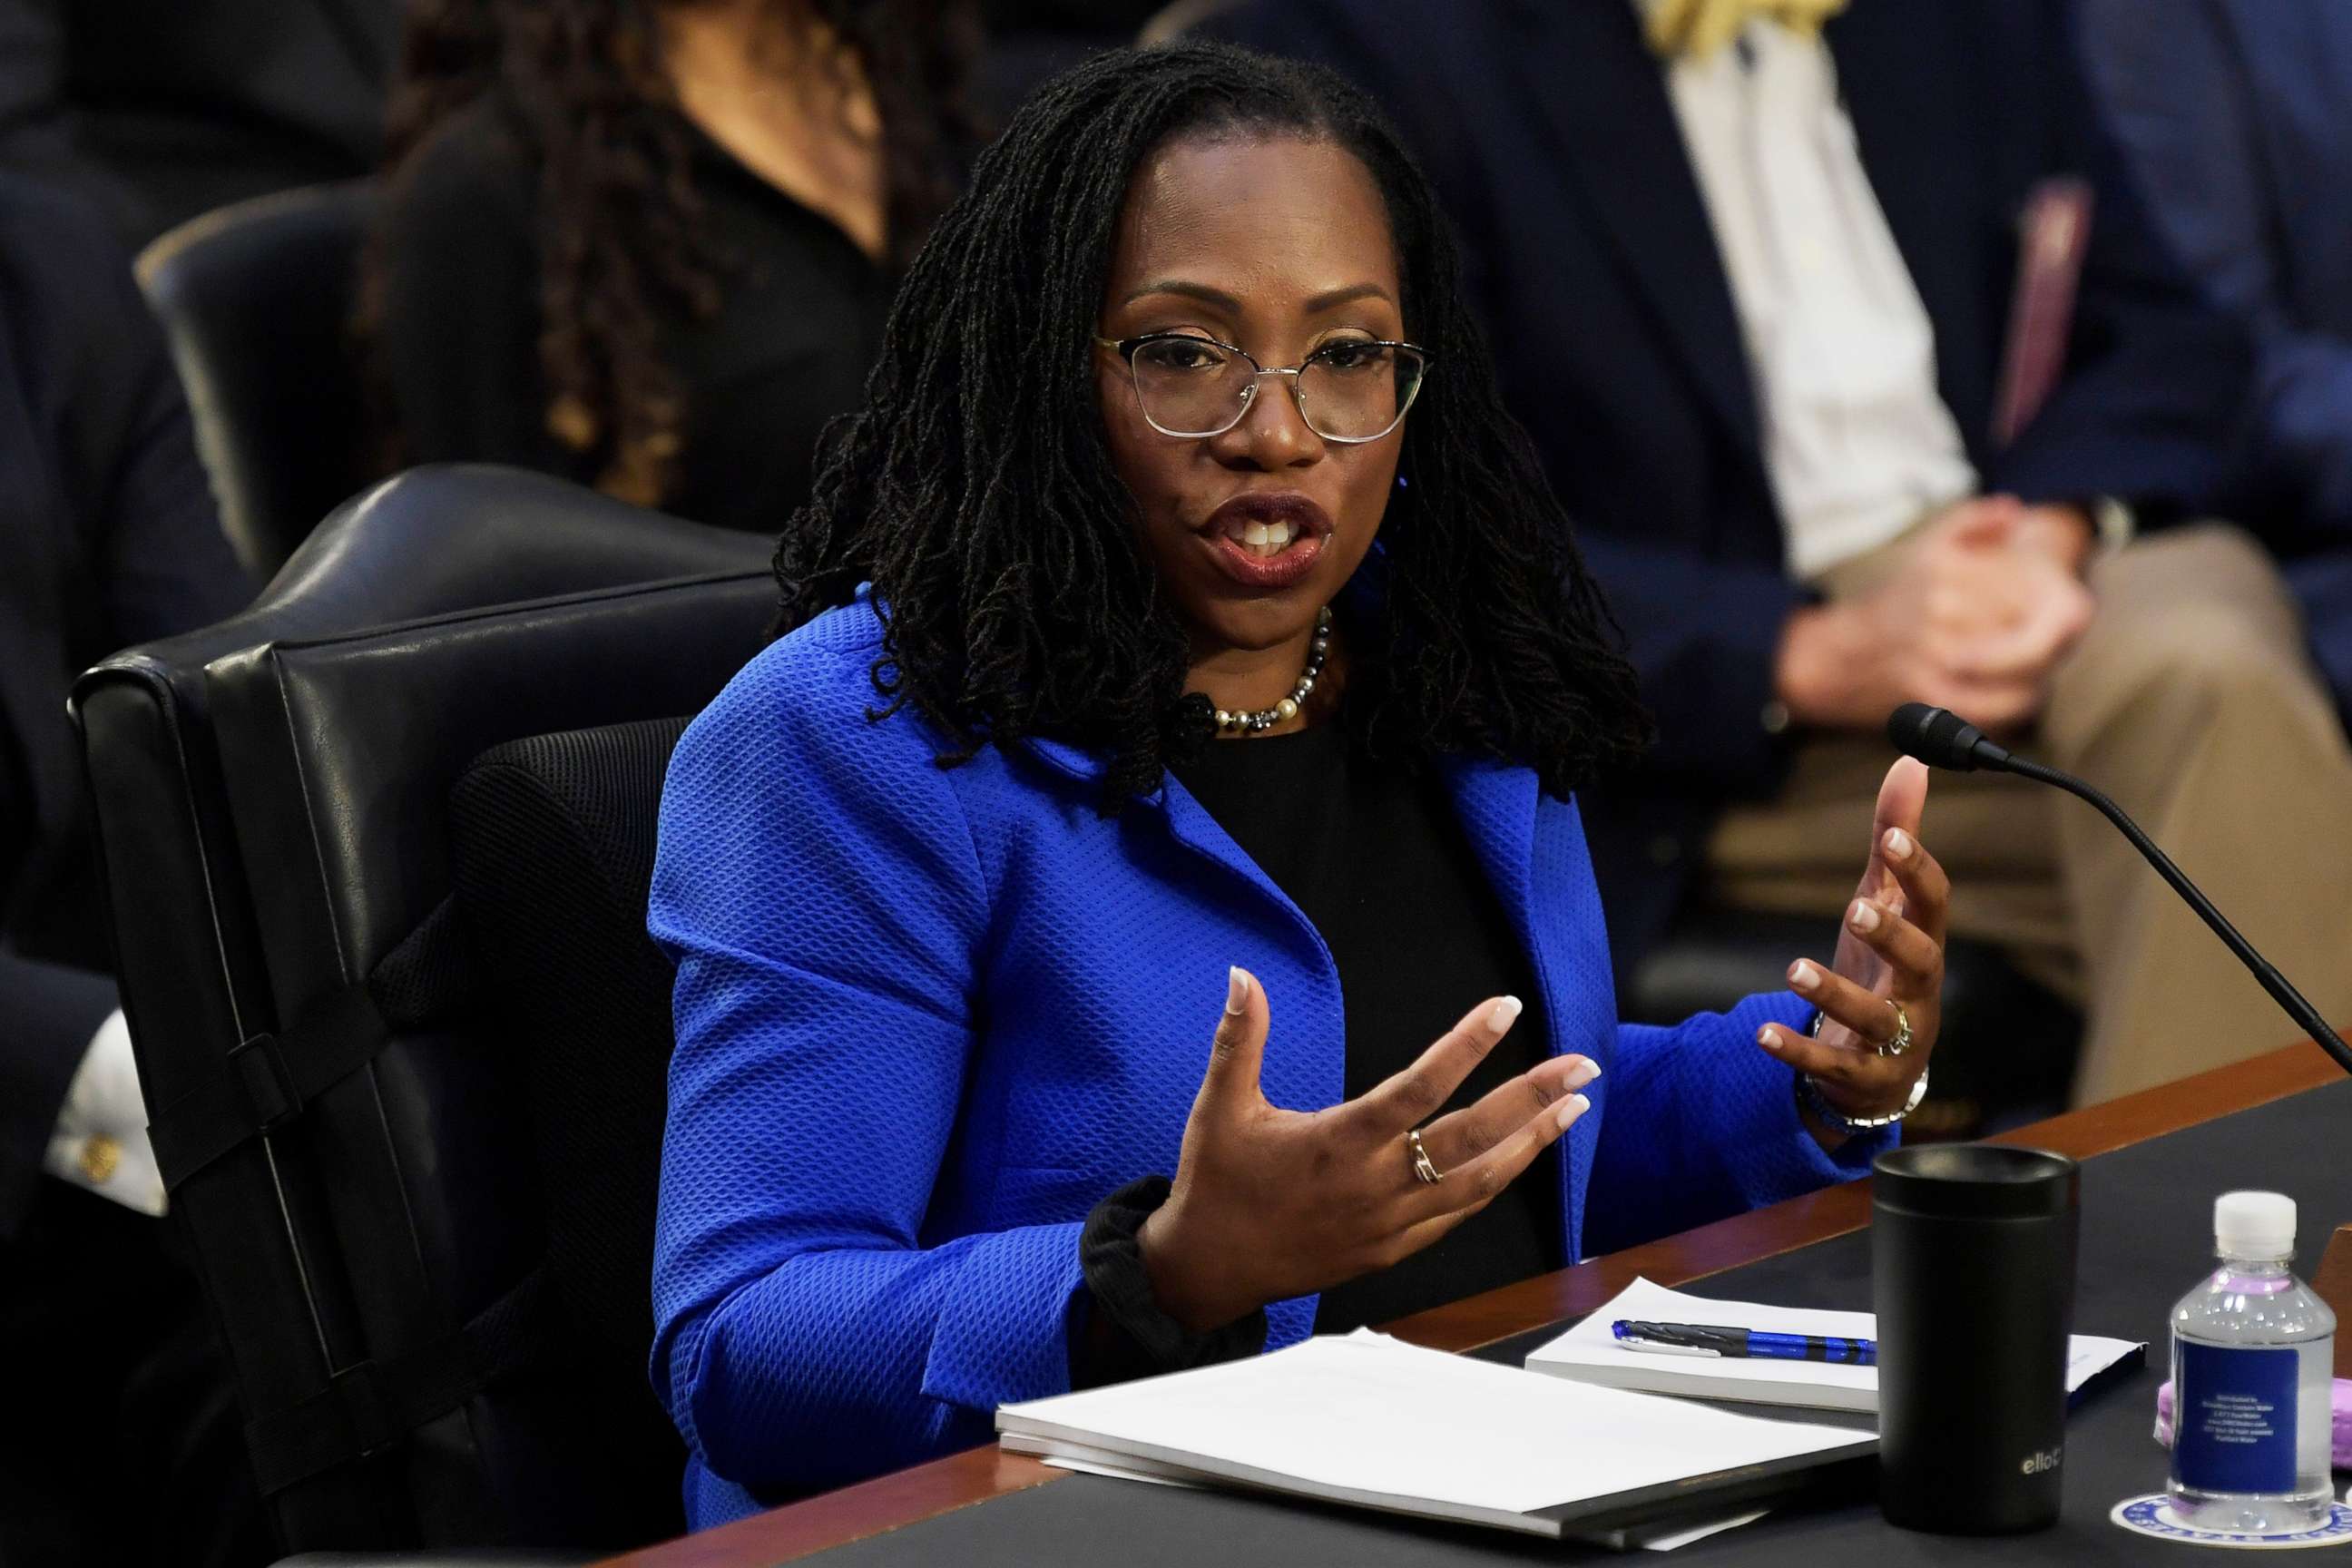 PHOTO: Supreme Court nominee Ketanji Brown Jackson testifies during her Senate Judiciary Committee confirmation hearing on Capitol Hill in Washington, D.C., March 23, 2022.